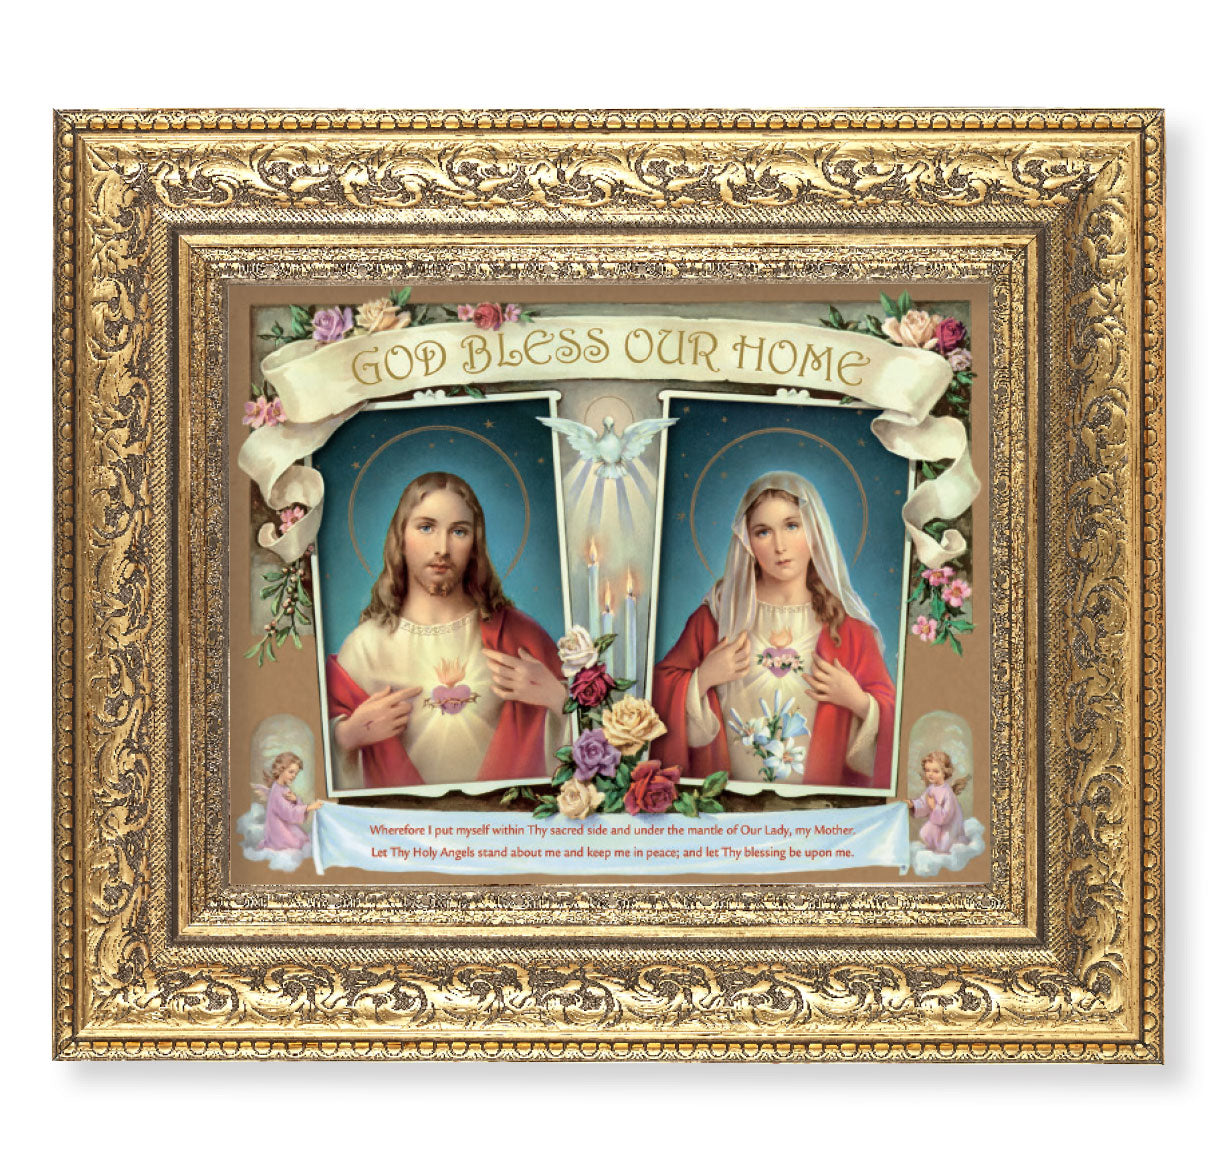 House Blessing Painting: Sacred Heart of Jesus and Immaculate Heart of Mary